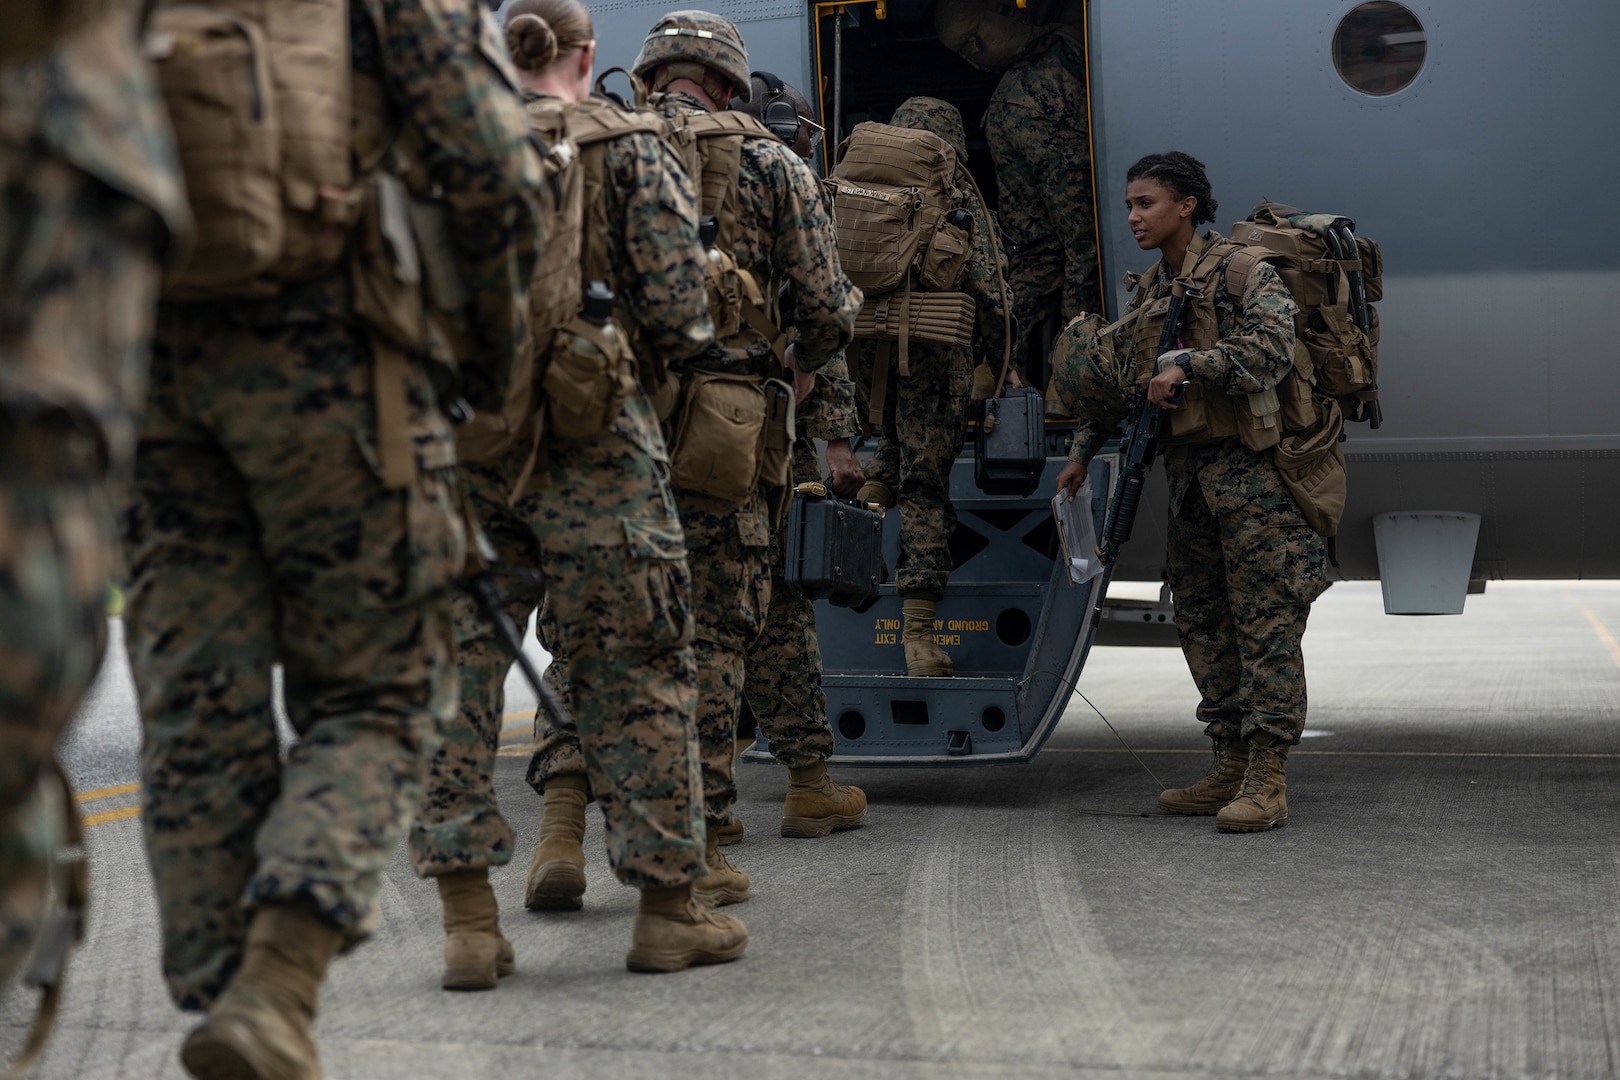 U.S. Marines simultaneously launch major bilateral exercises with Japan, Philippines